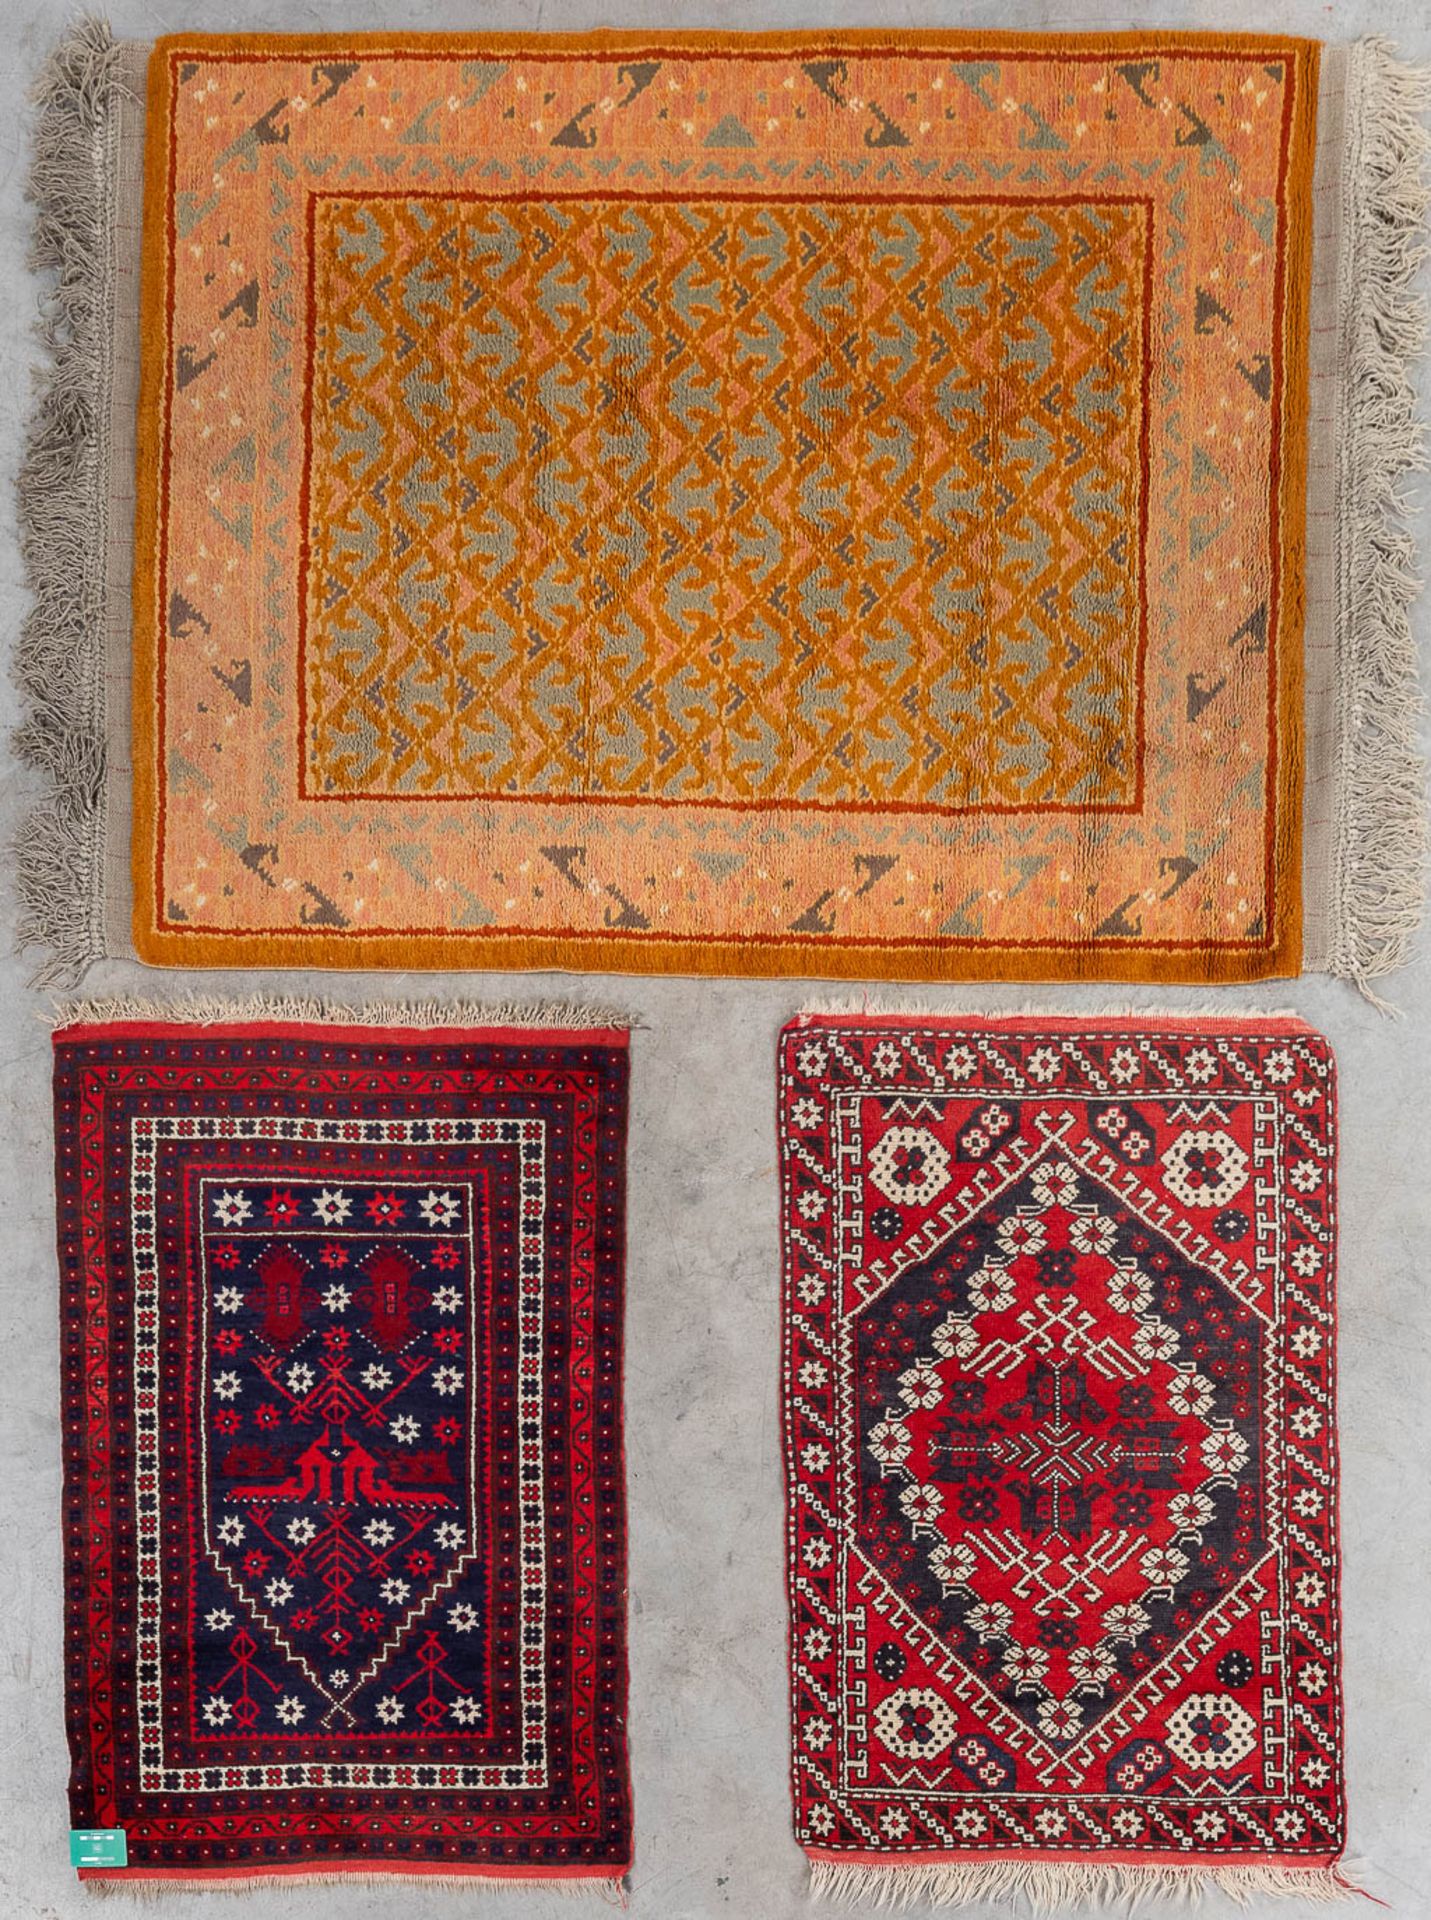 A collection of 3 Oriental hand-made carpets. Turkey. (L: 185 x W: 140 cm) - Image 2 of 11